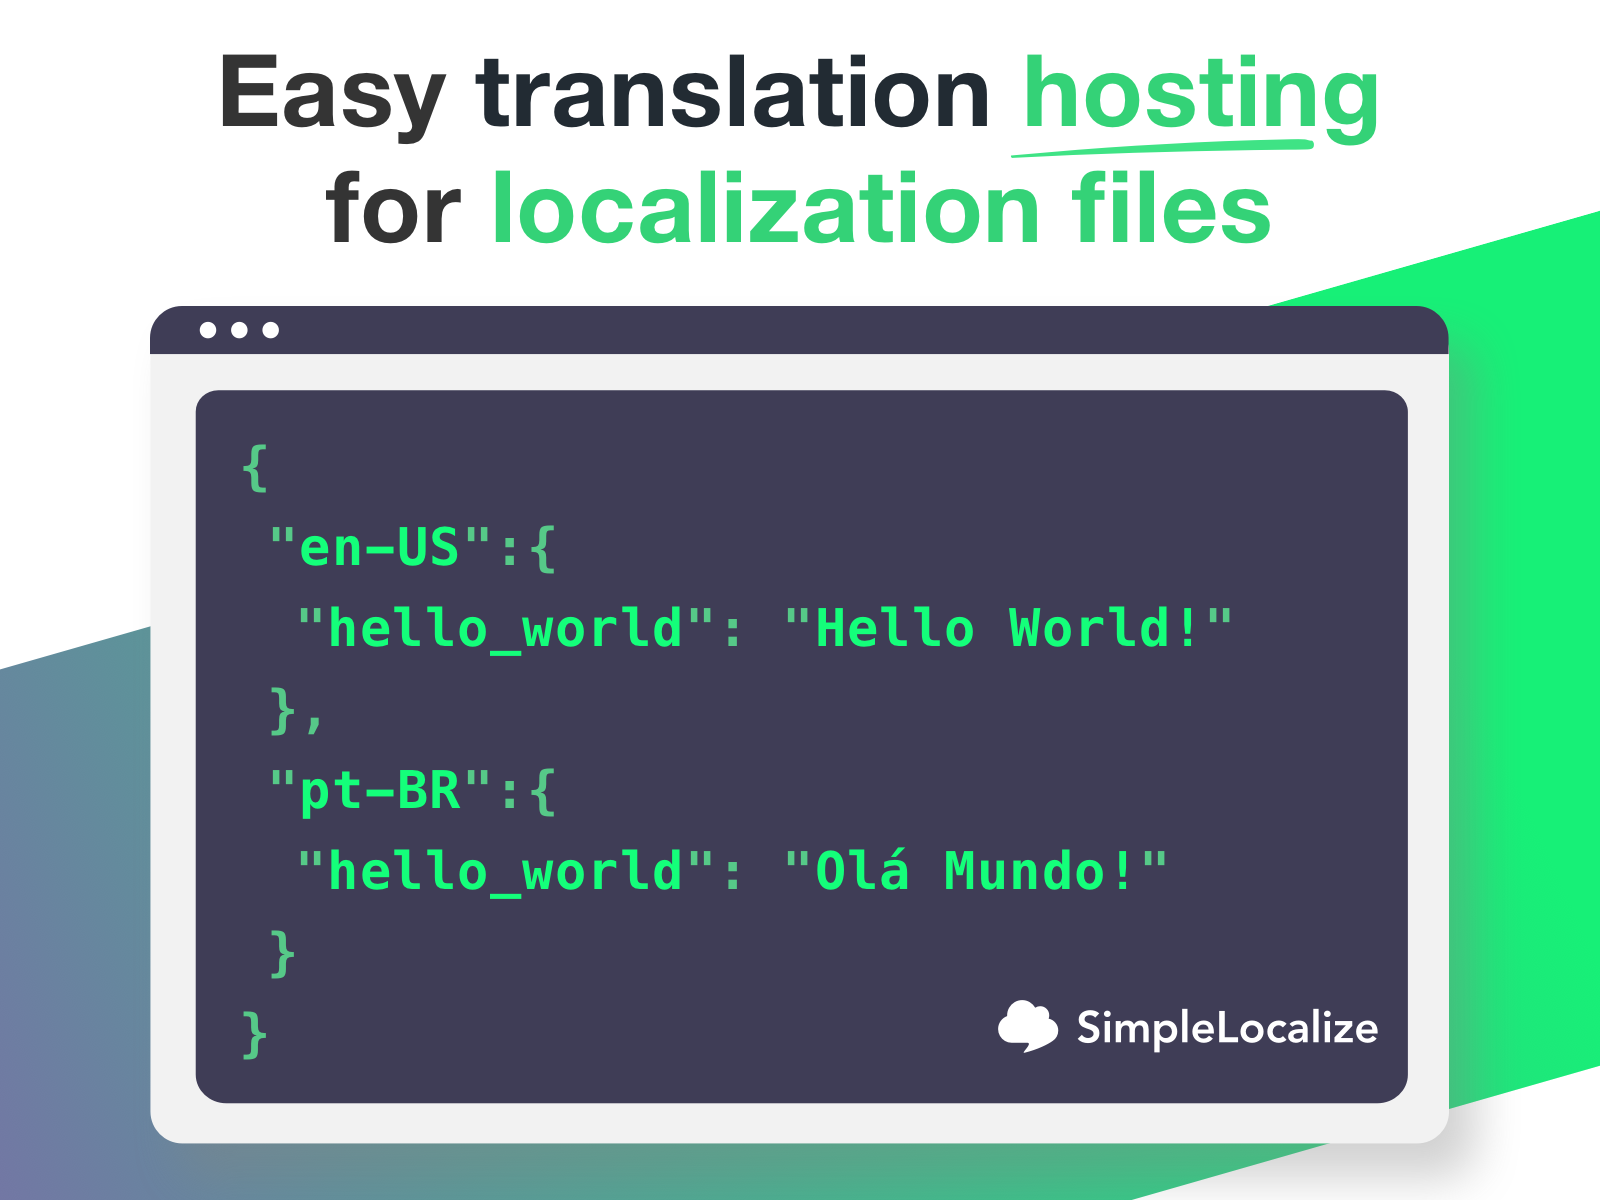 fetching translations from backend